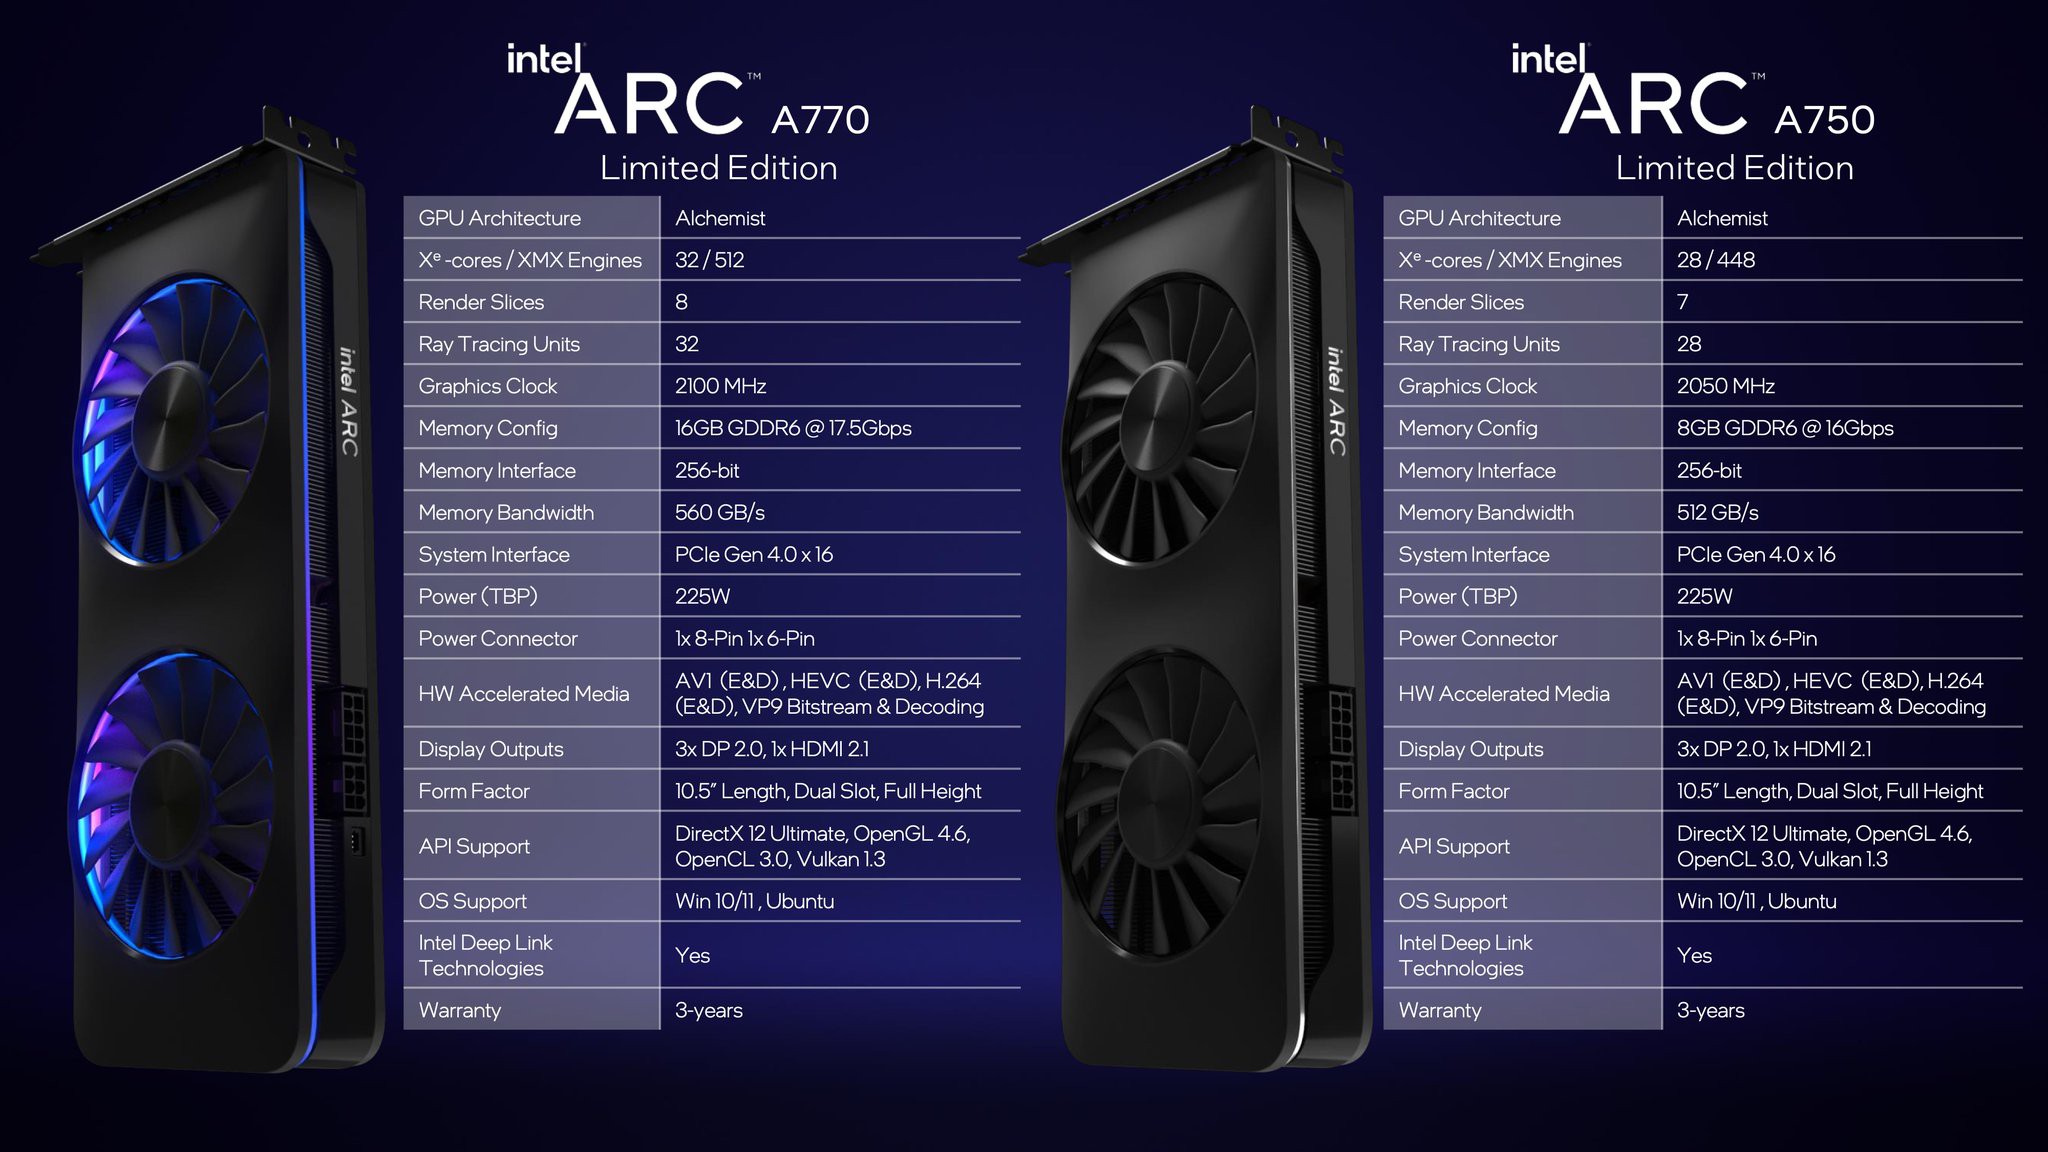 Intel Arc A770: The Most Powerful Graphics Card Yet